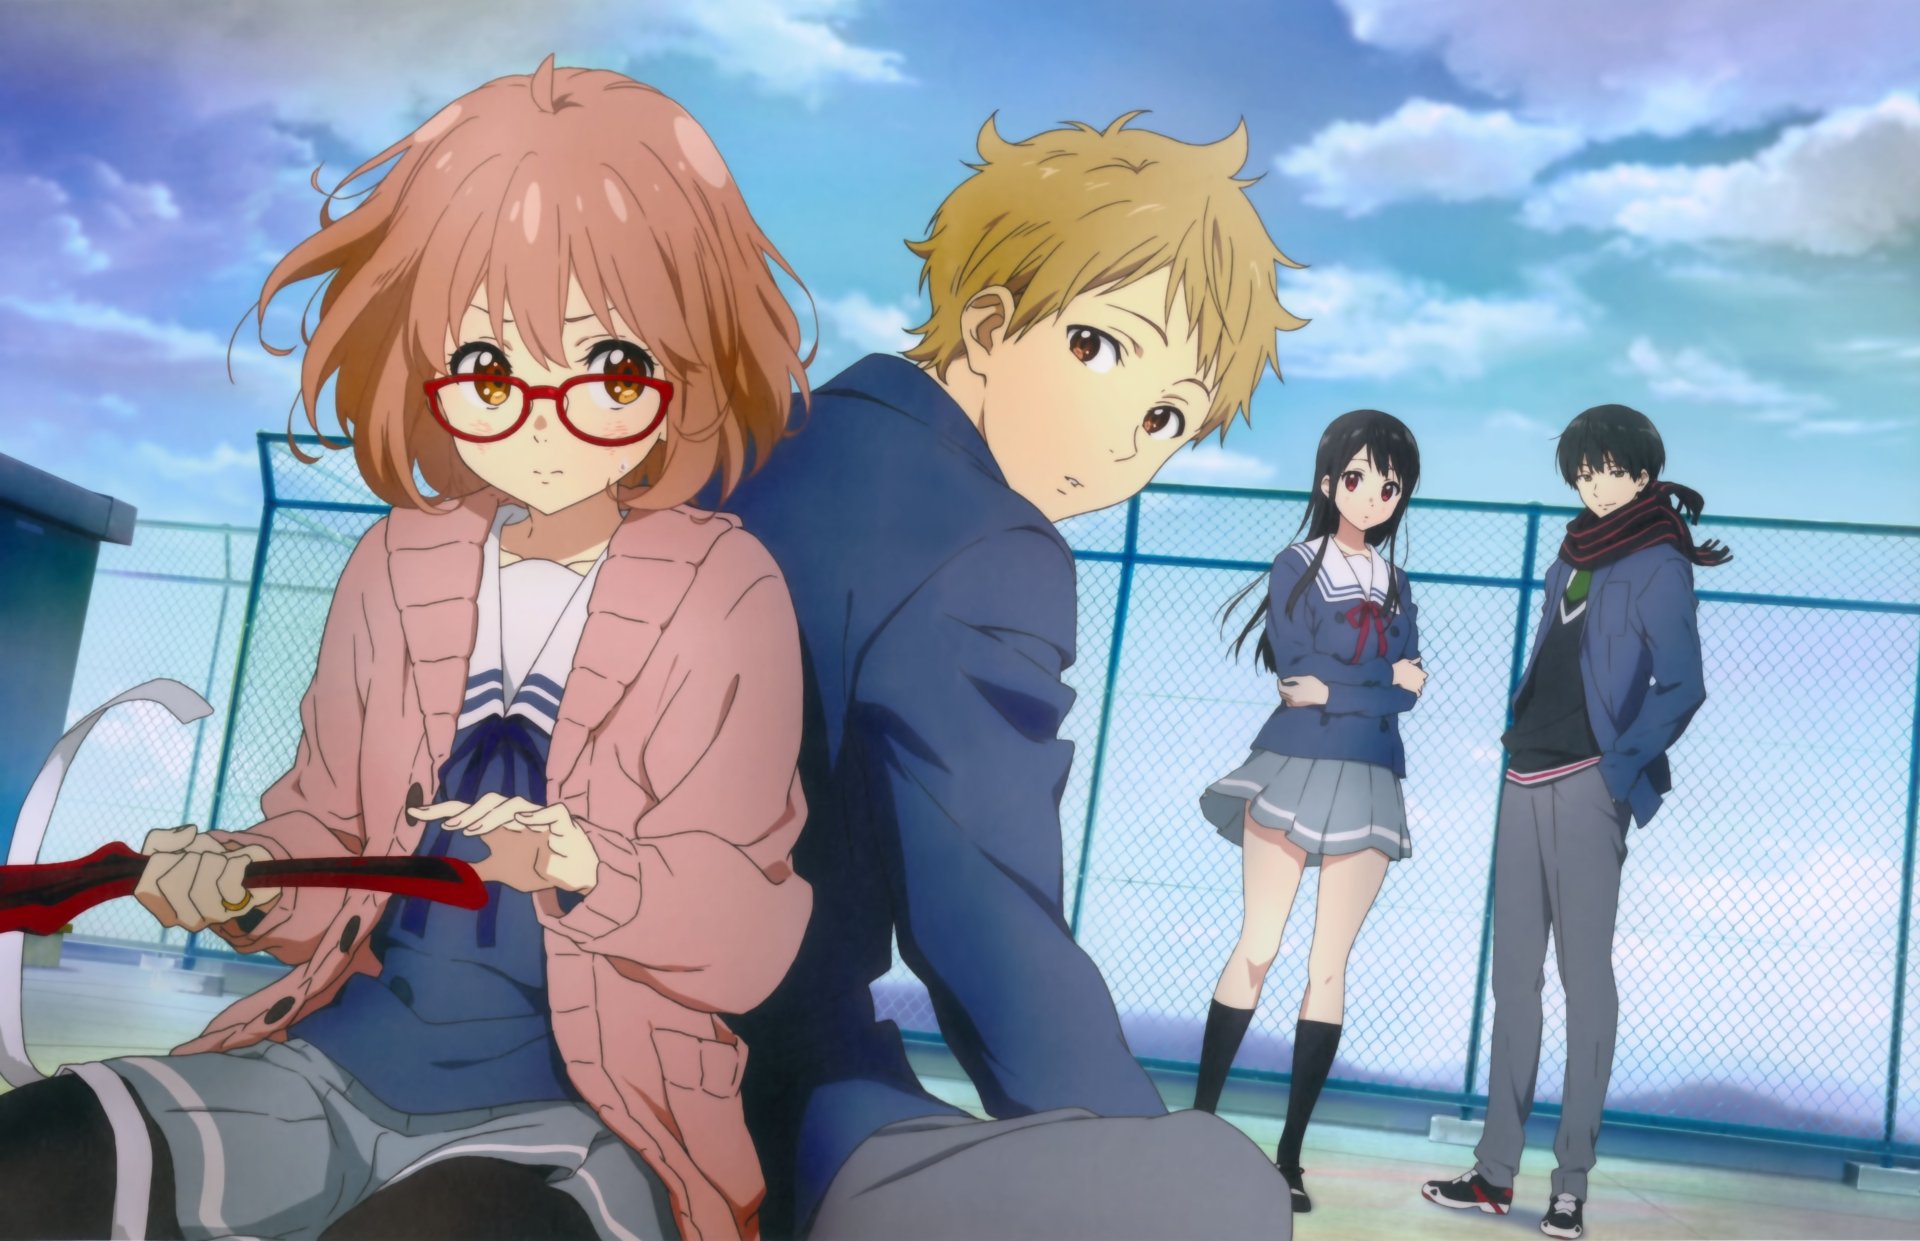 Hiroomi Nase from Beyond the Boundary